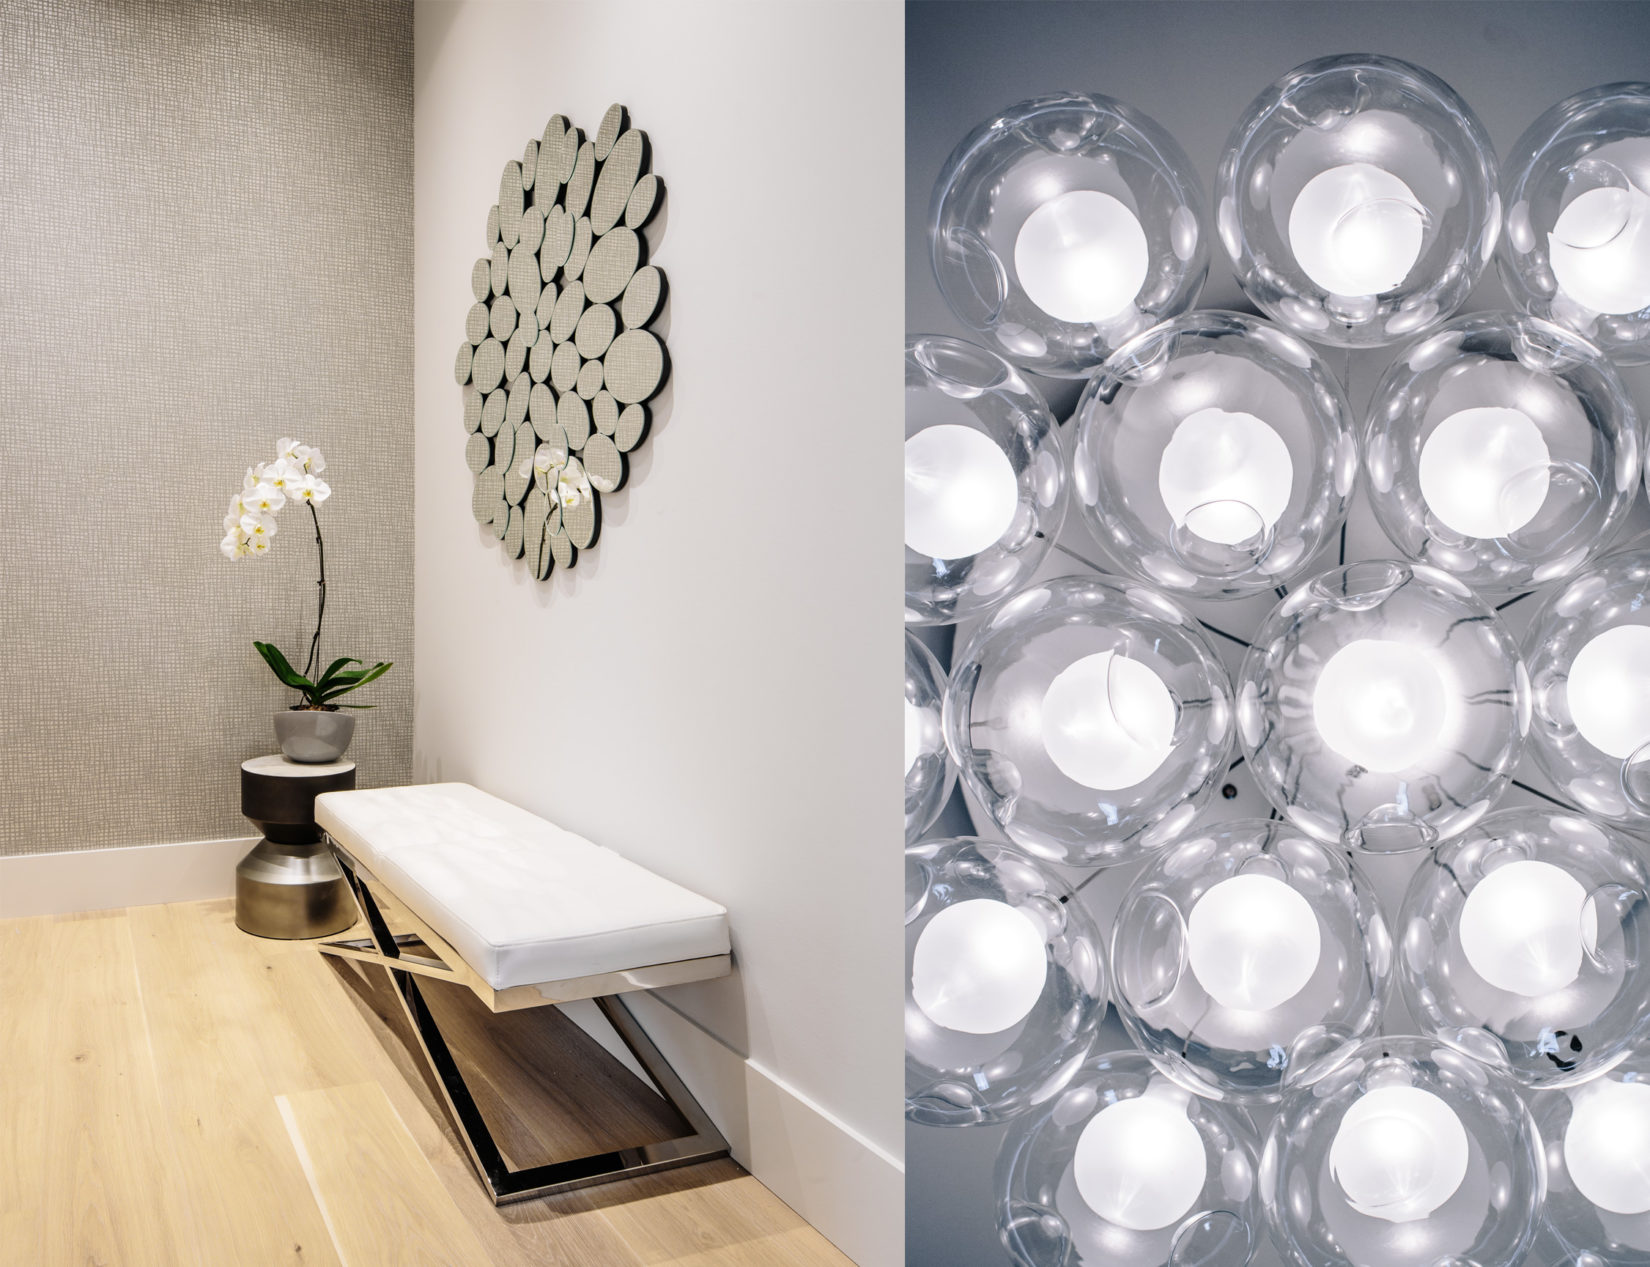 Alexandra Interiors contemporary entrance with glass bulbs cluster light fixture and white leather bench. Interior design Vancouver